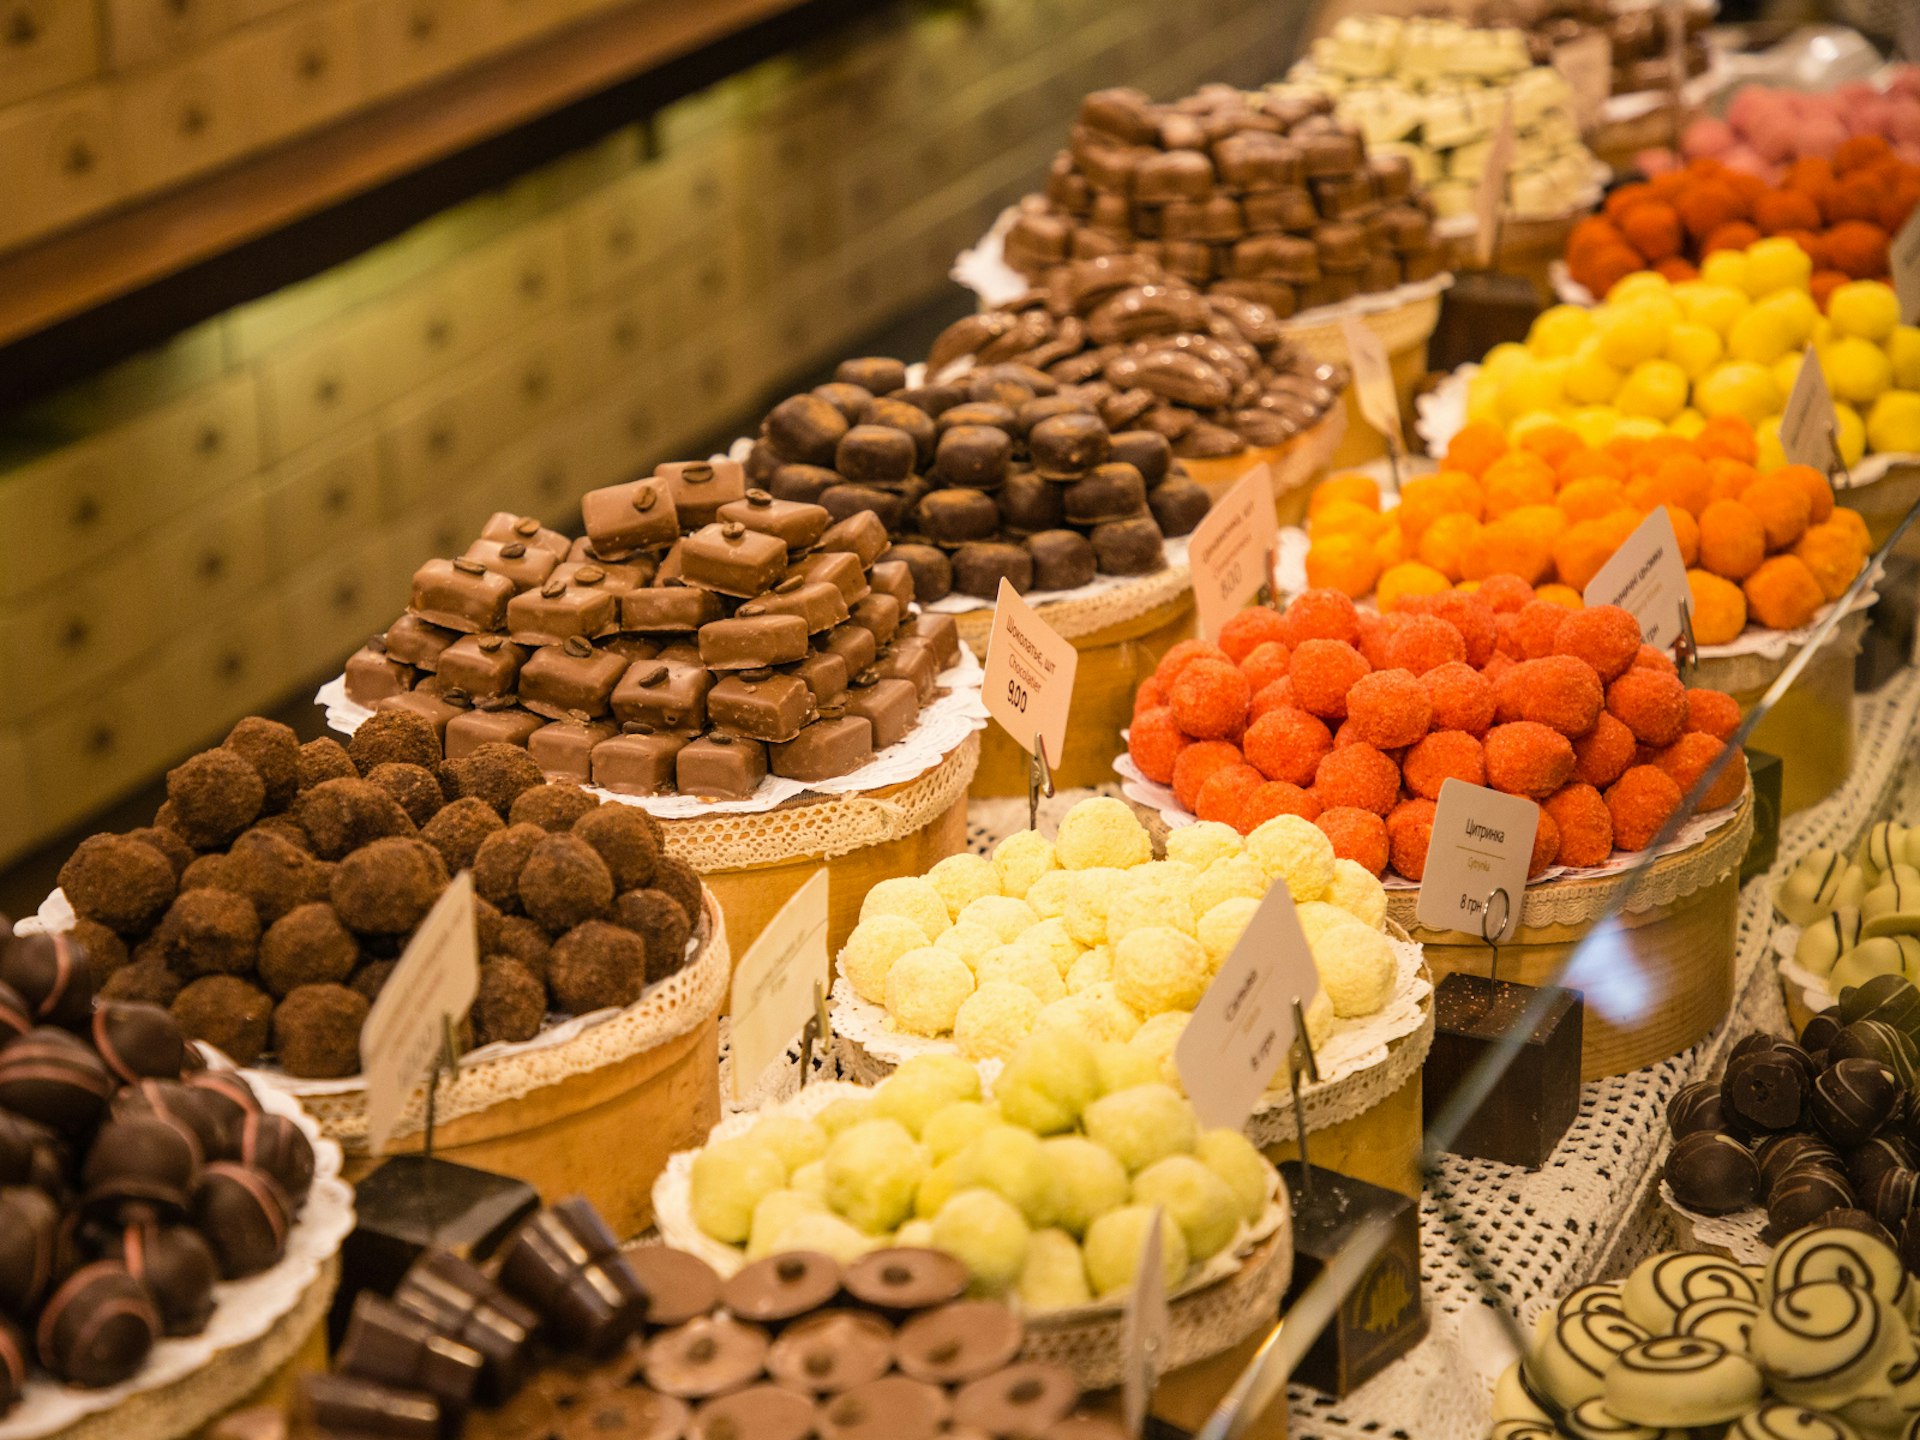 Colourful handmade chocolates for sale at one of Lviv's trademark shops © Marta Huk / Shutterstock